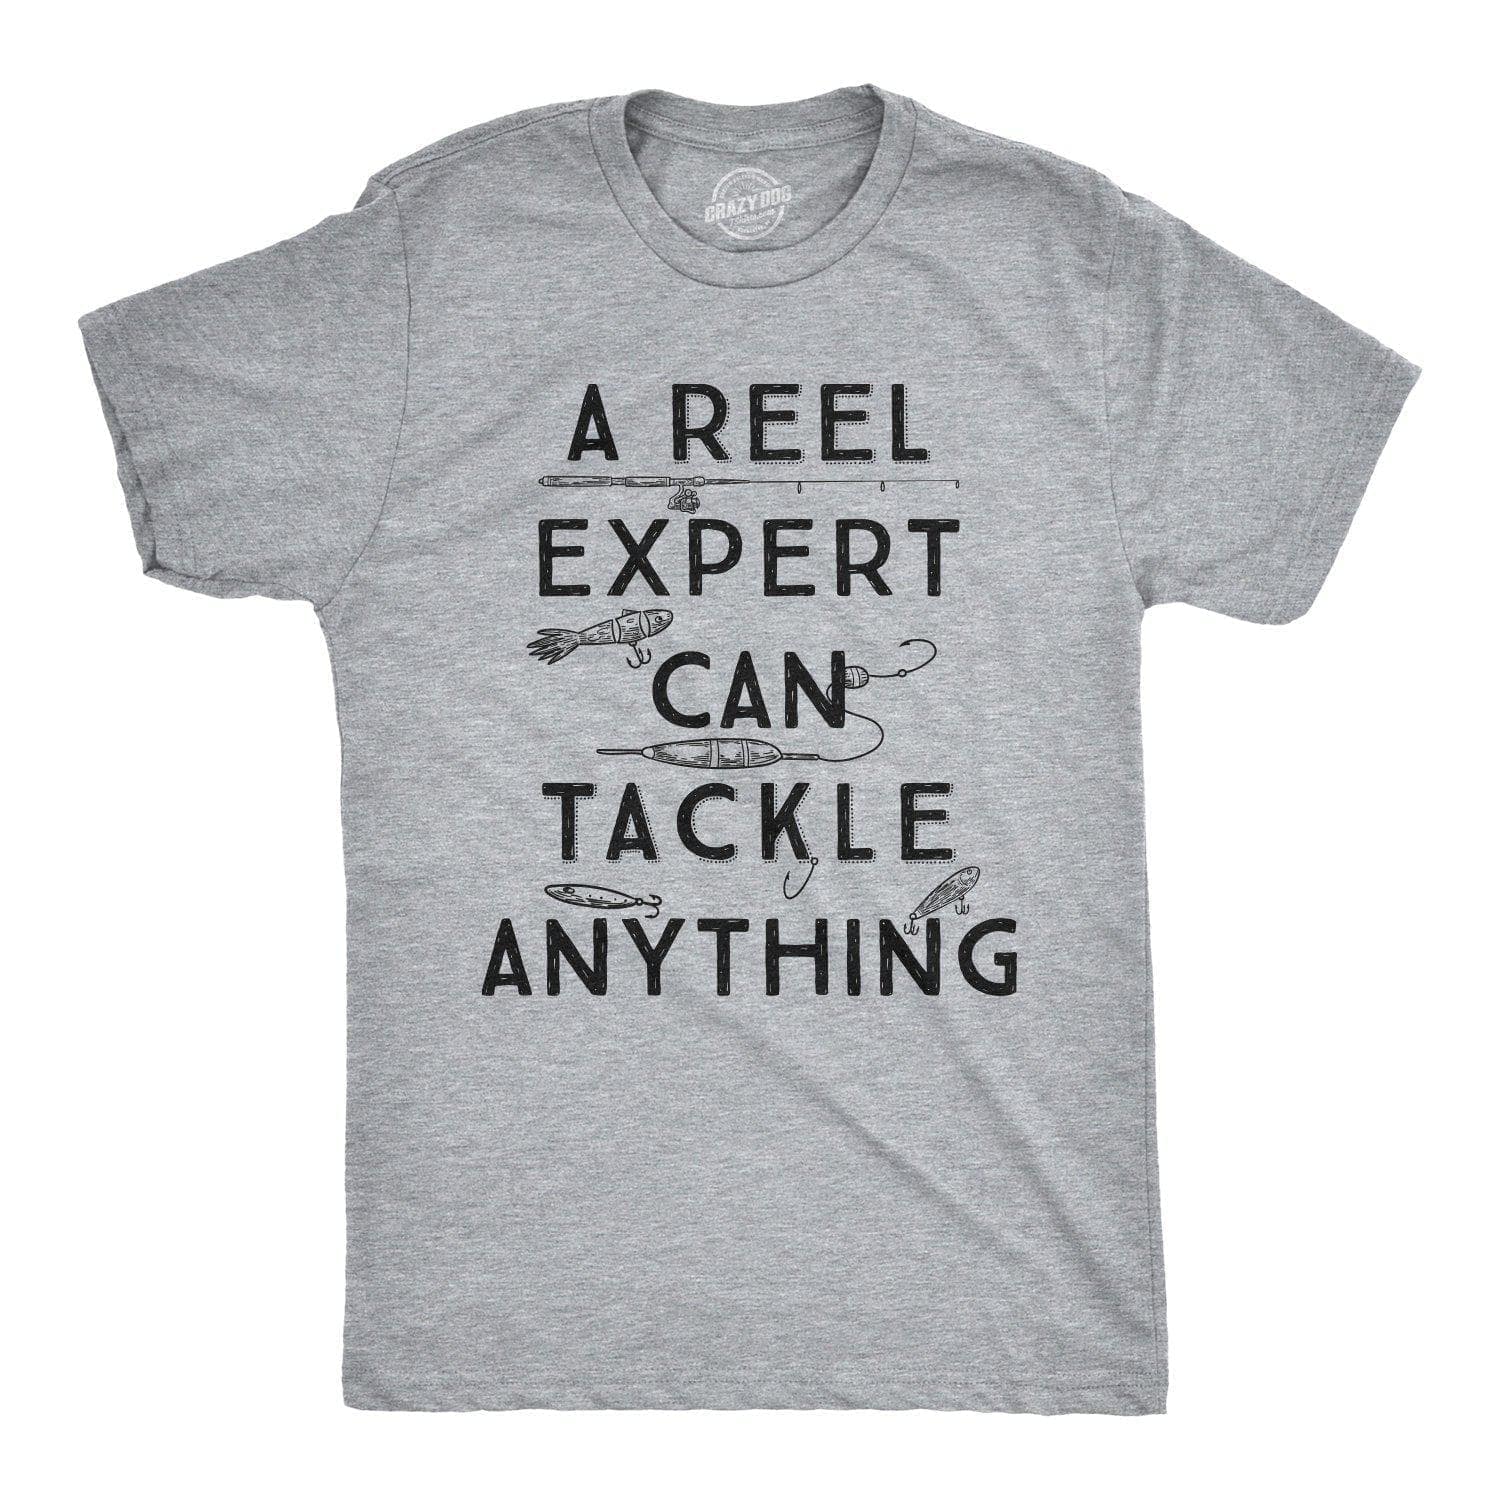 A Reel Expert Can Tackle Anything Men's Tshirt - Crazy Dog T-Shirts